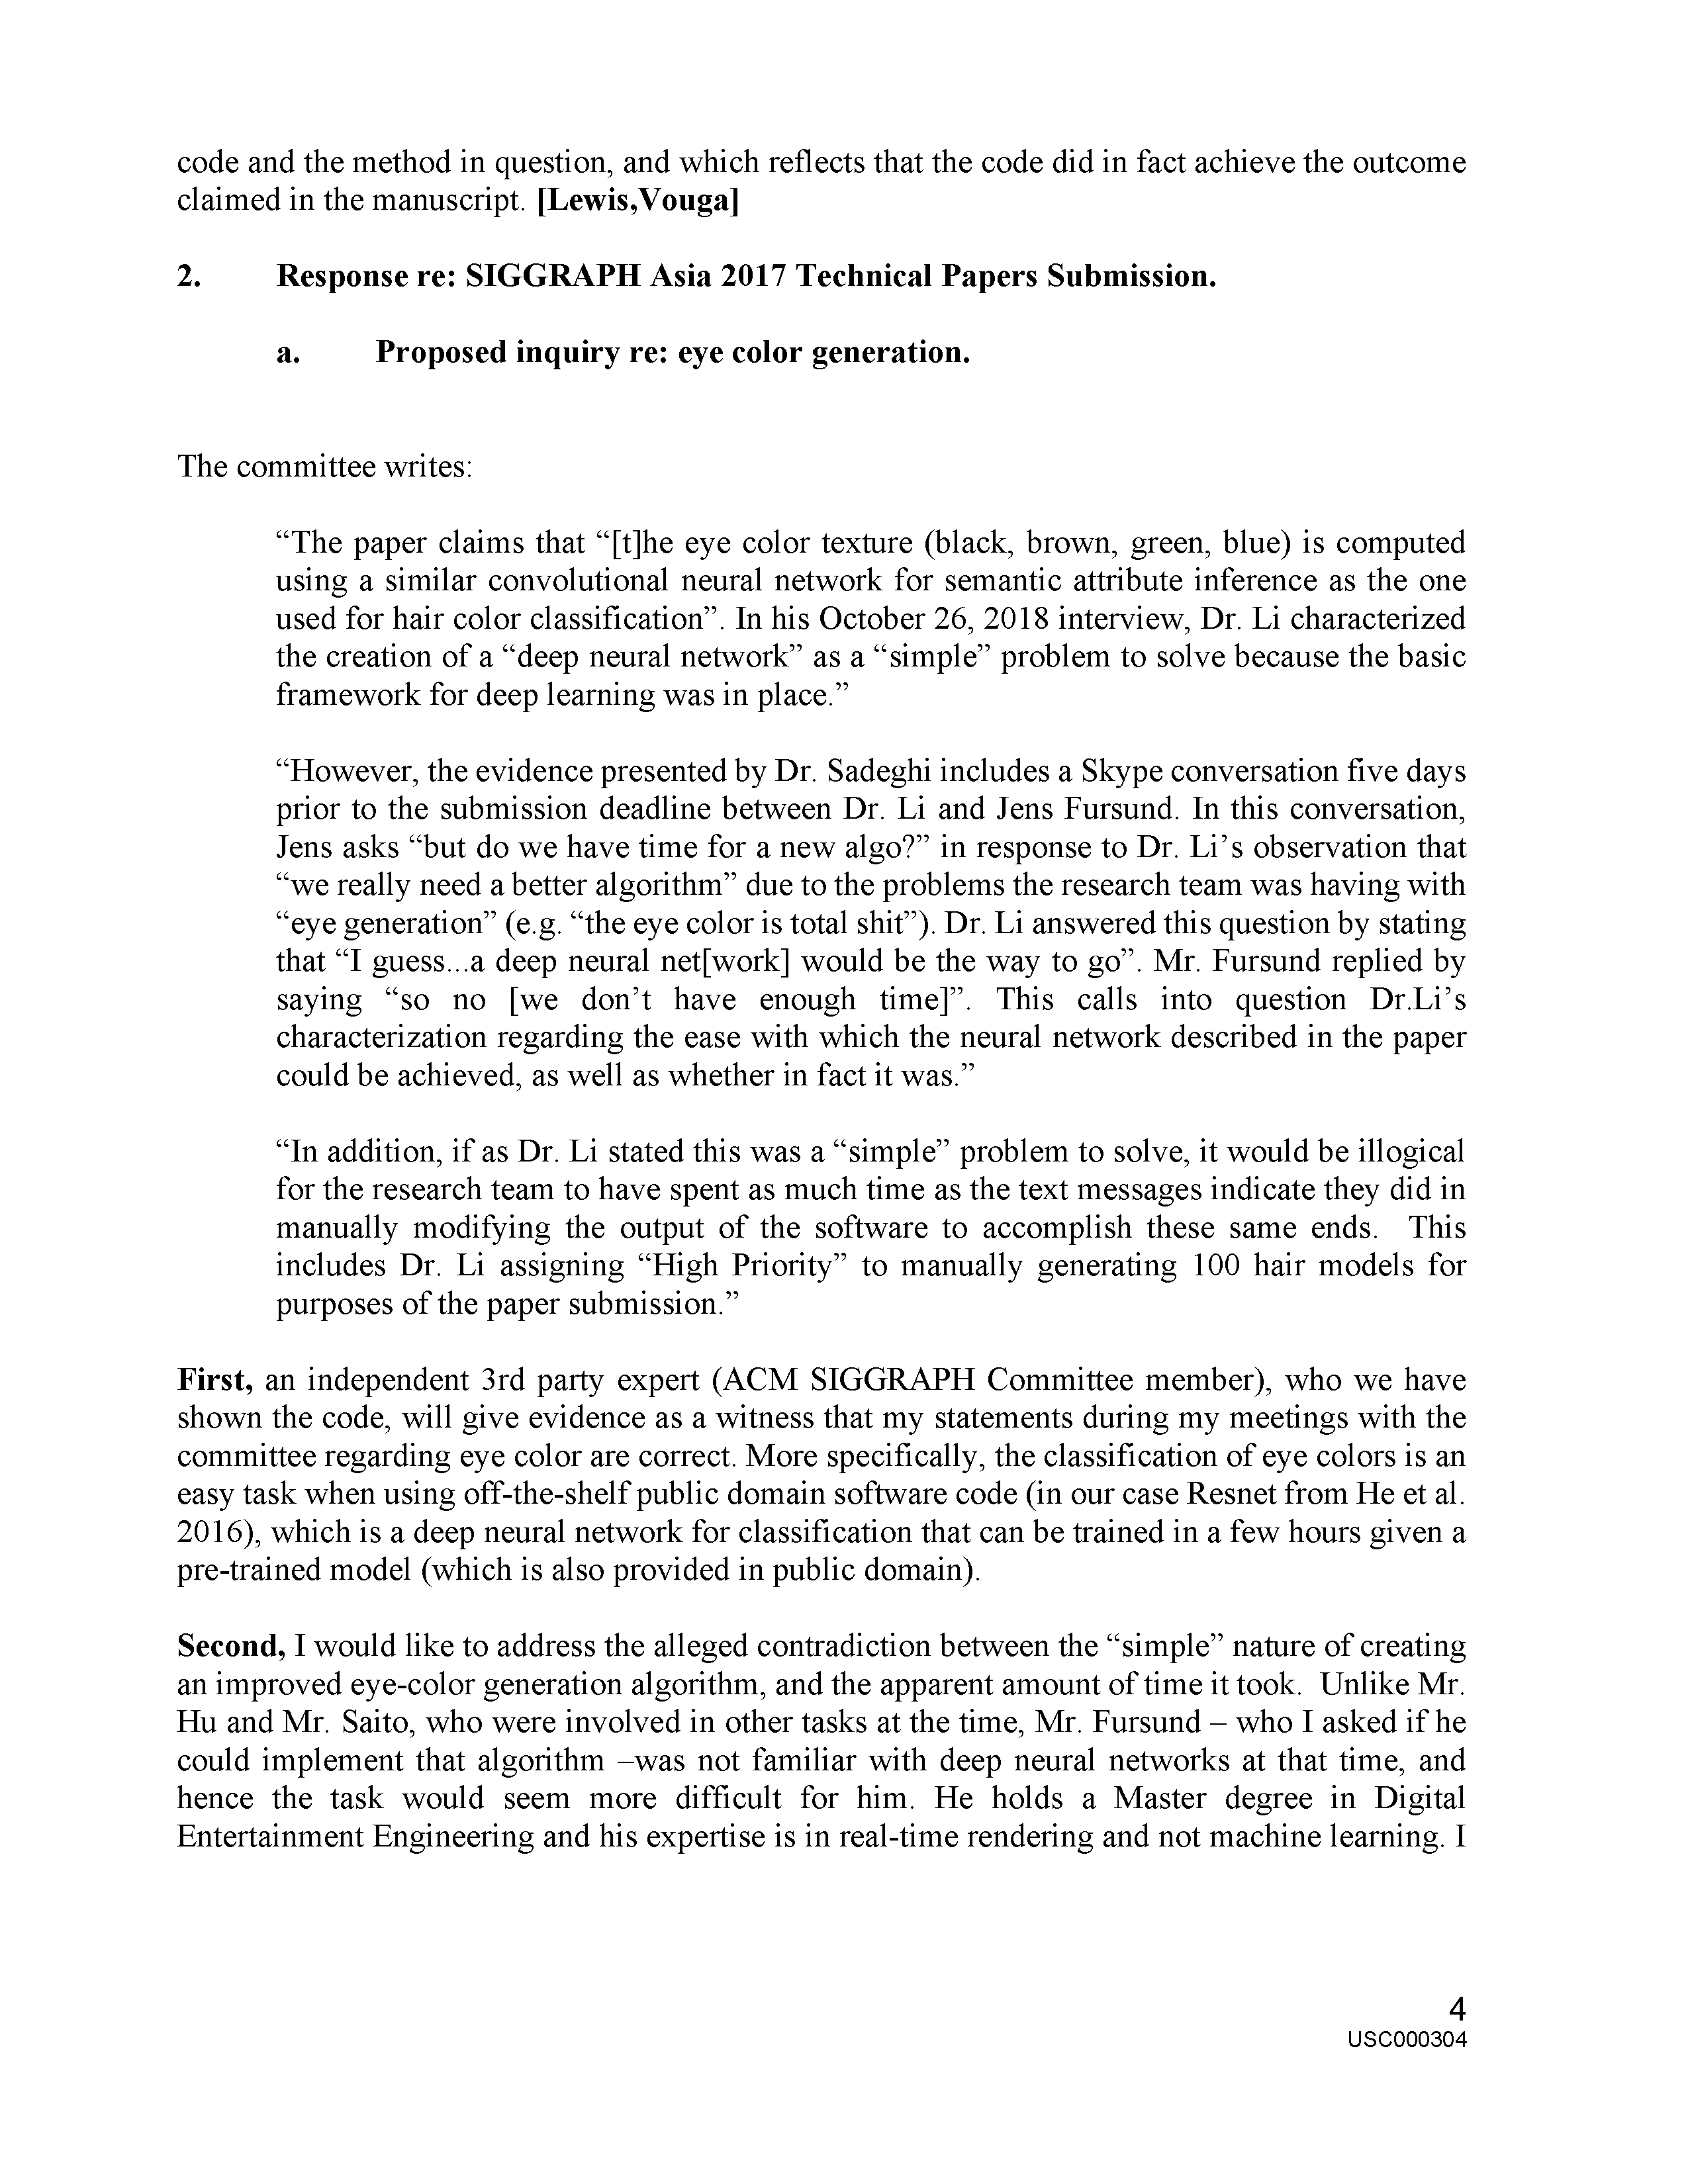 USC's Investigation Report re Hao Li's and Pinscreen's Scientific Misconduct at ACM SIGGRAPH RTL 2017 - Full Report Page 306